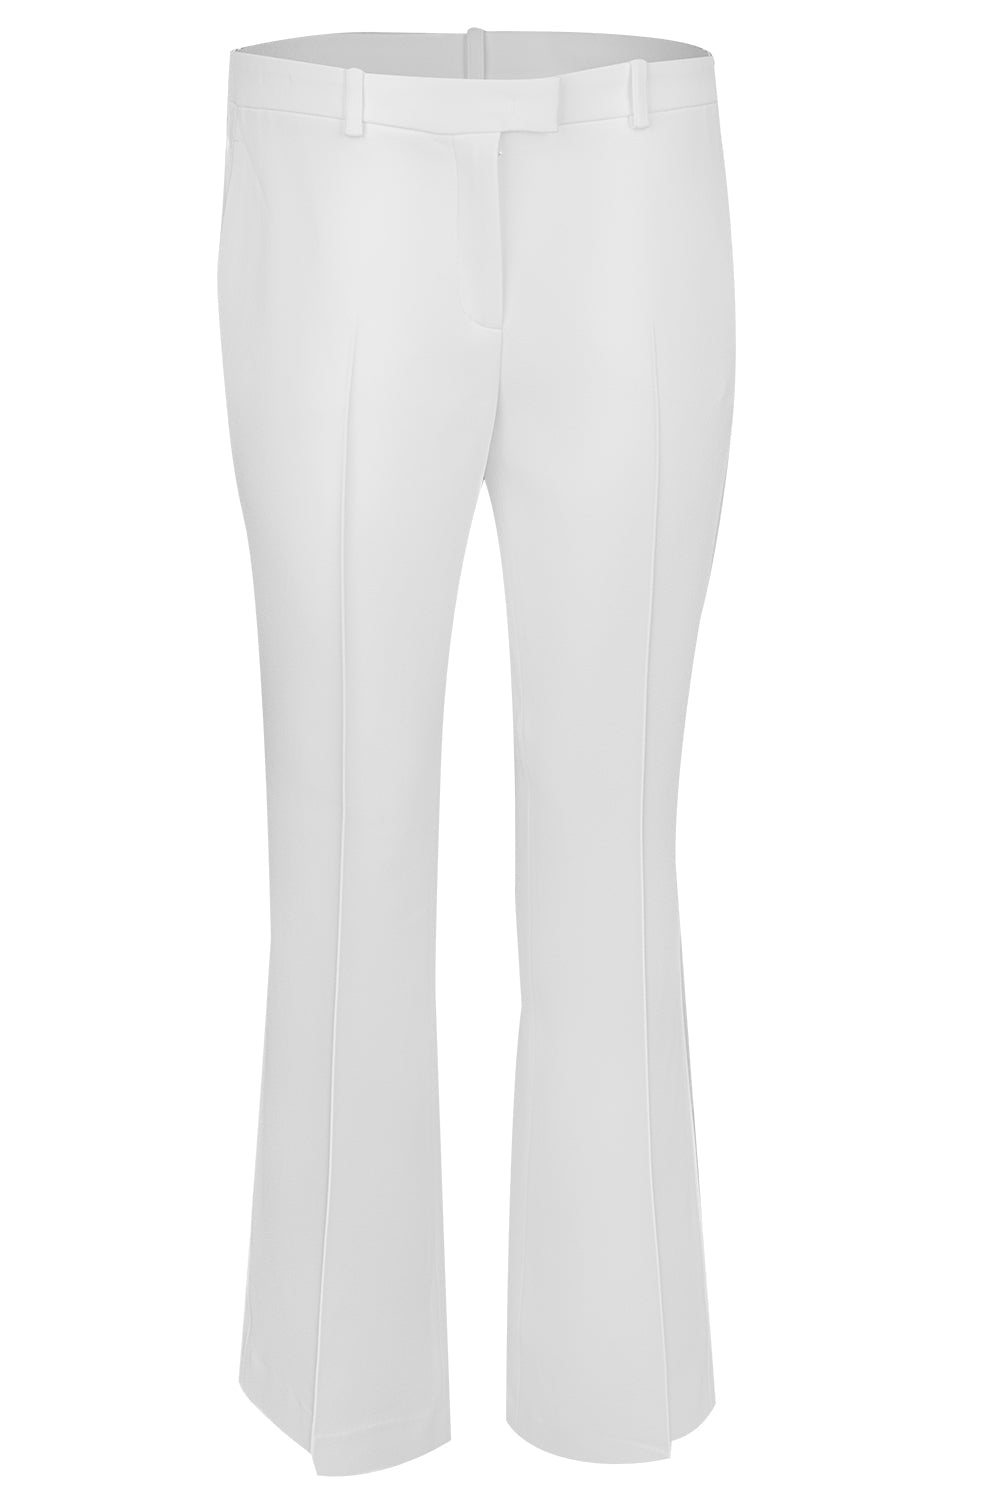 Haylee Trouser - Optic White CLOTHINGPANTCROPPED MICHAEL KORS COLLECTION   